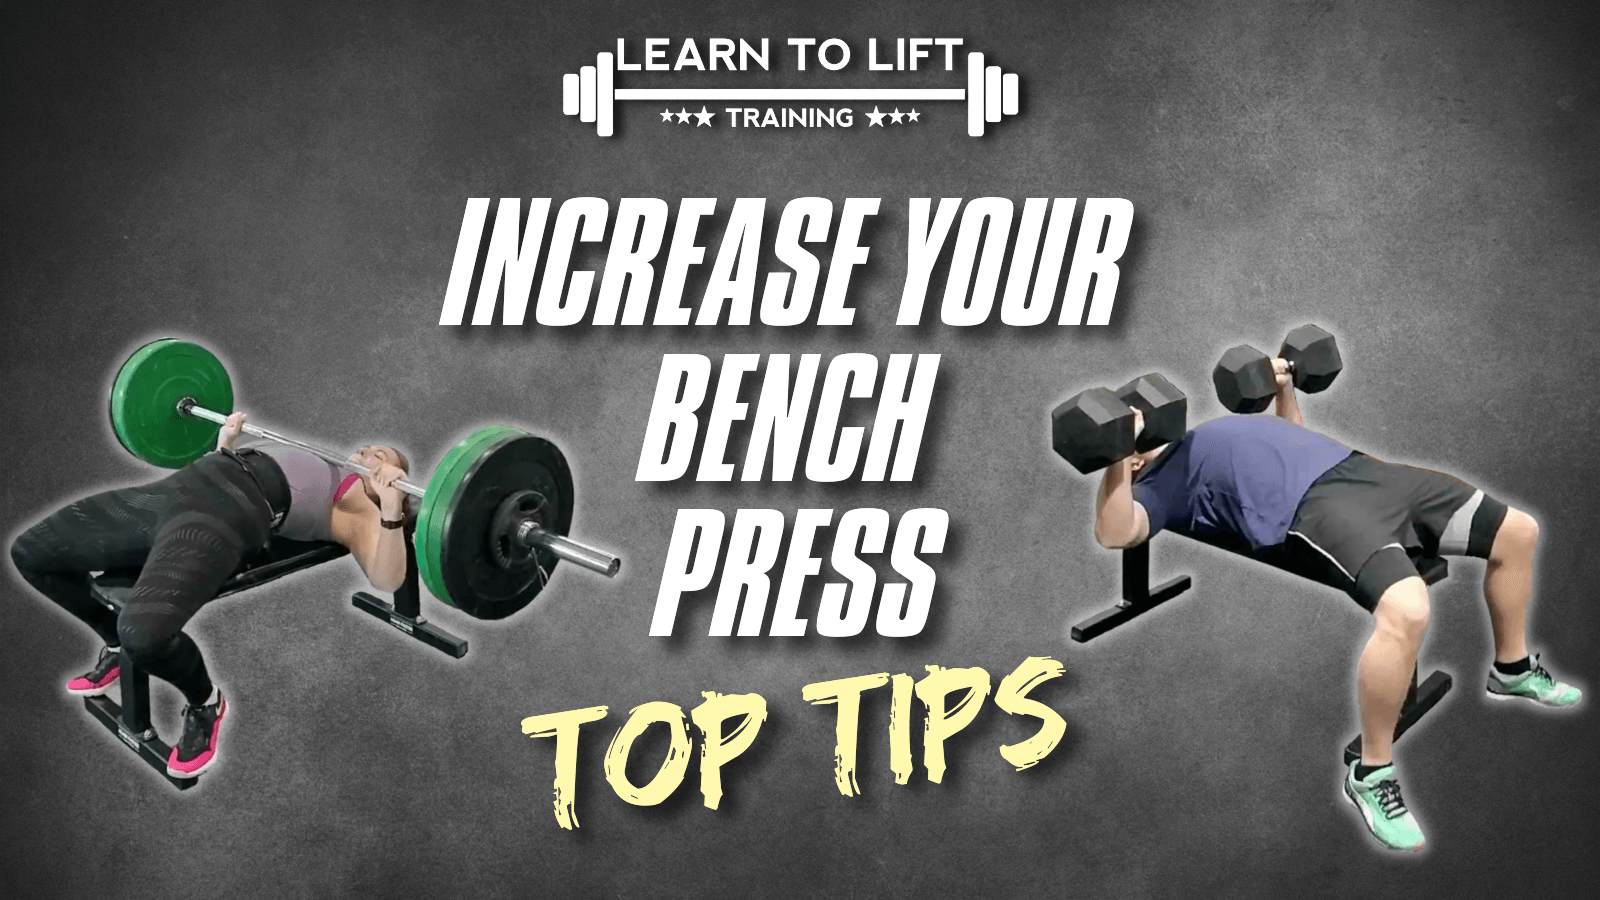 Glasgow Bootcamp - Increase Your Bench Press Top Tips